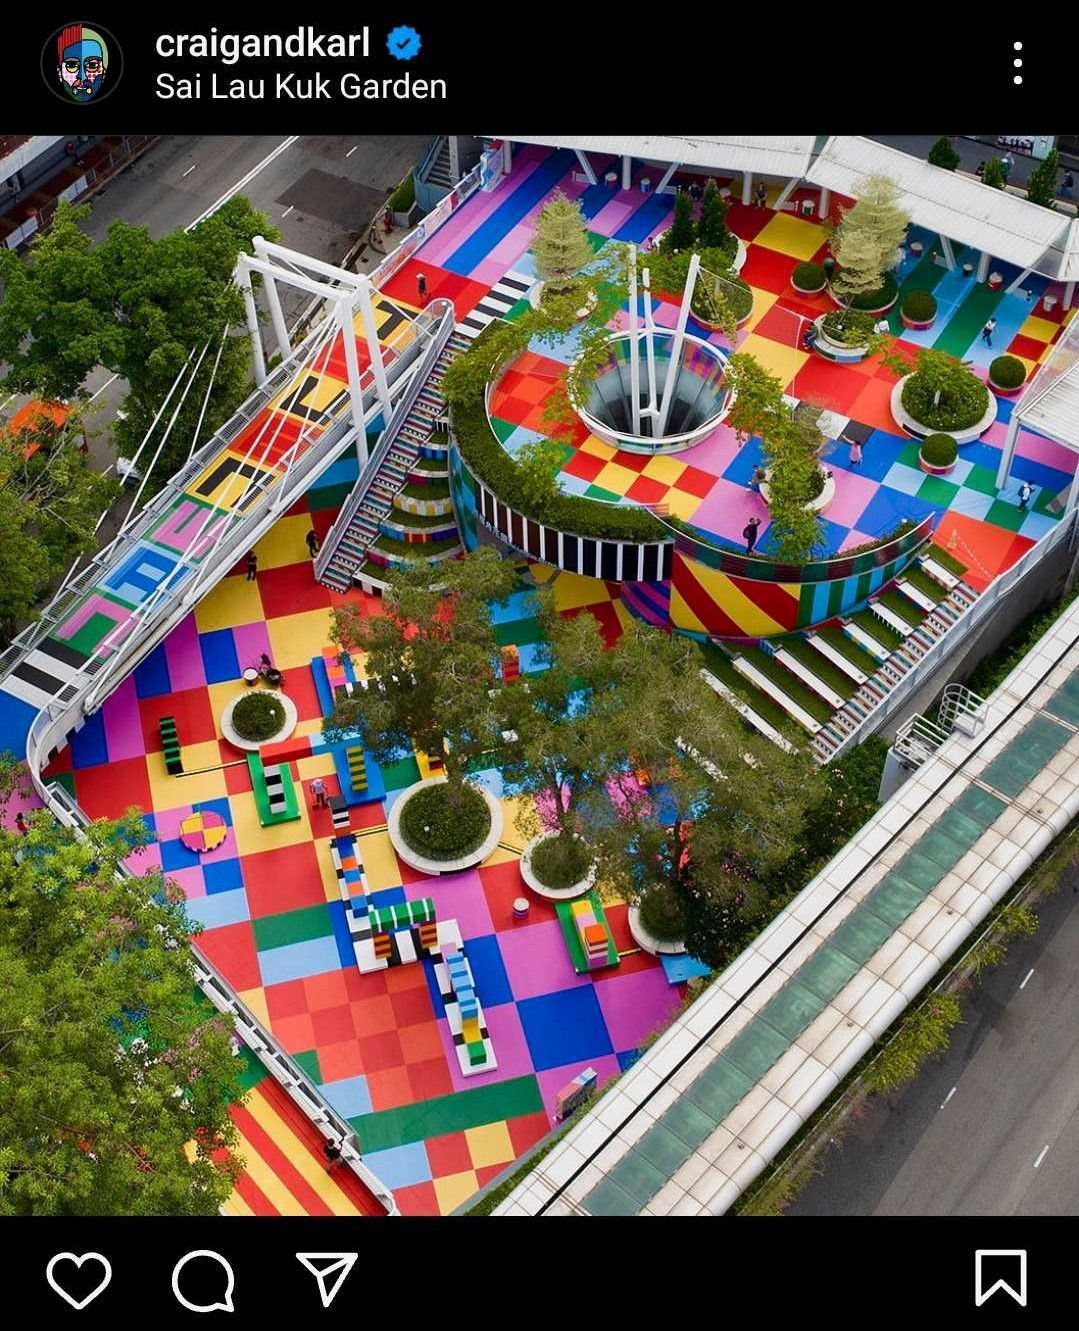 “Prismatic” playground art installation opens for a limited time in Hong Kong